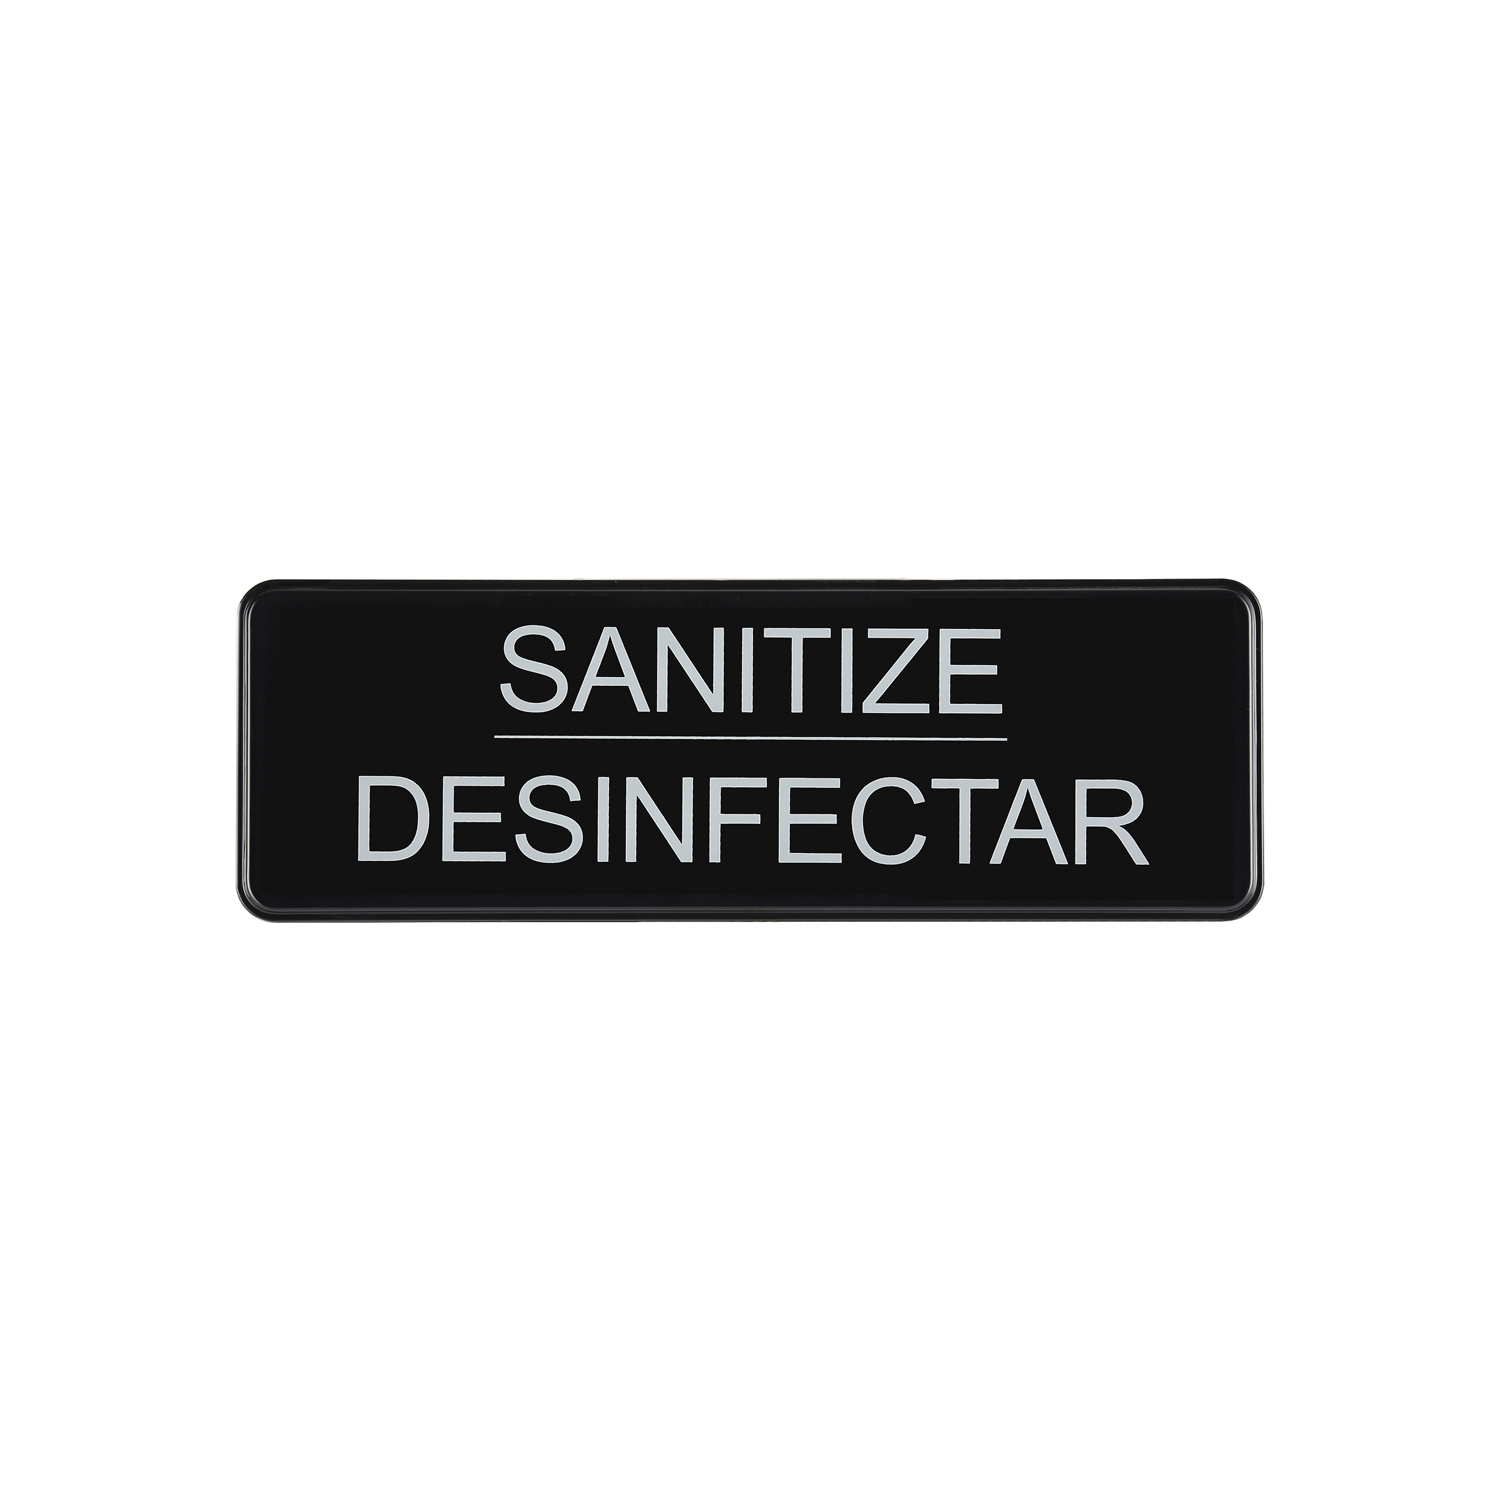 CAC China SCS3-SZ05 Compliance Sign English/Spanish "Sanitize" 9"x 3" H